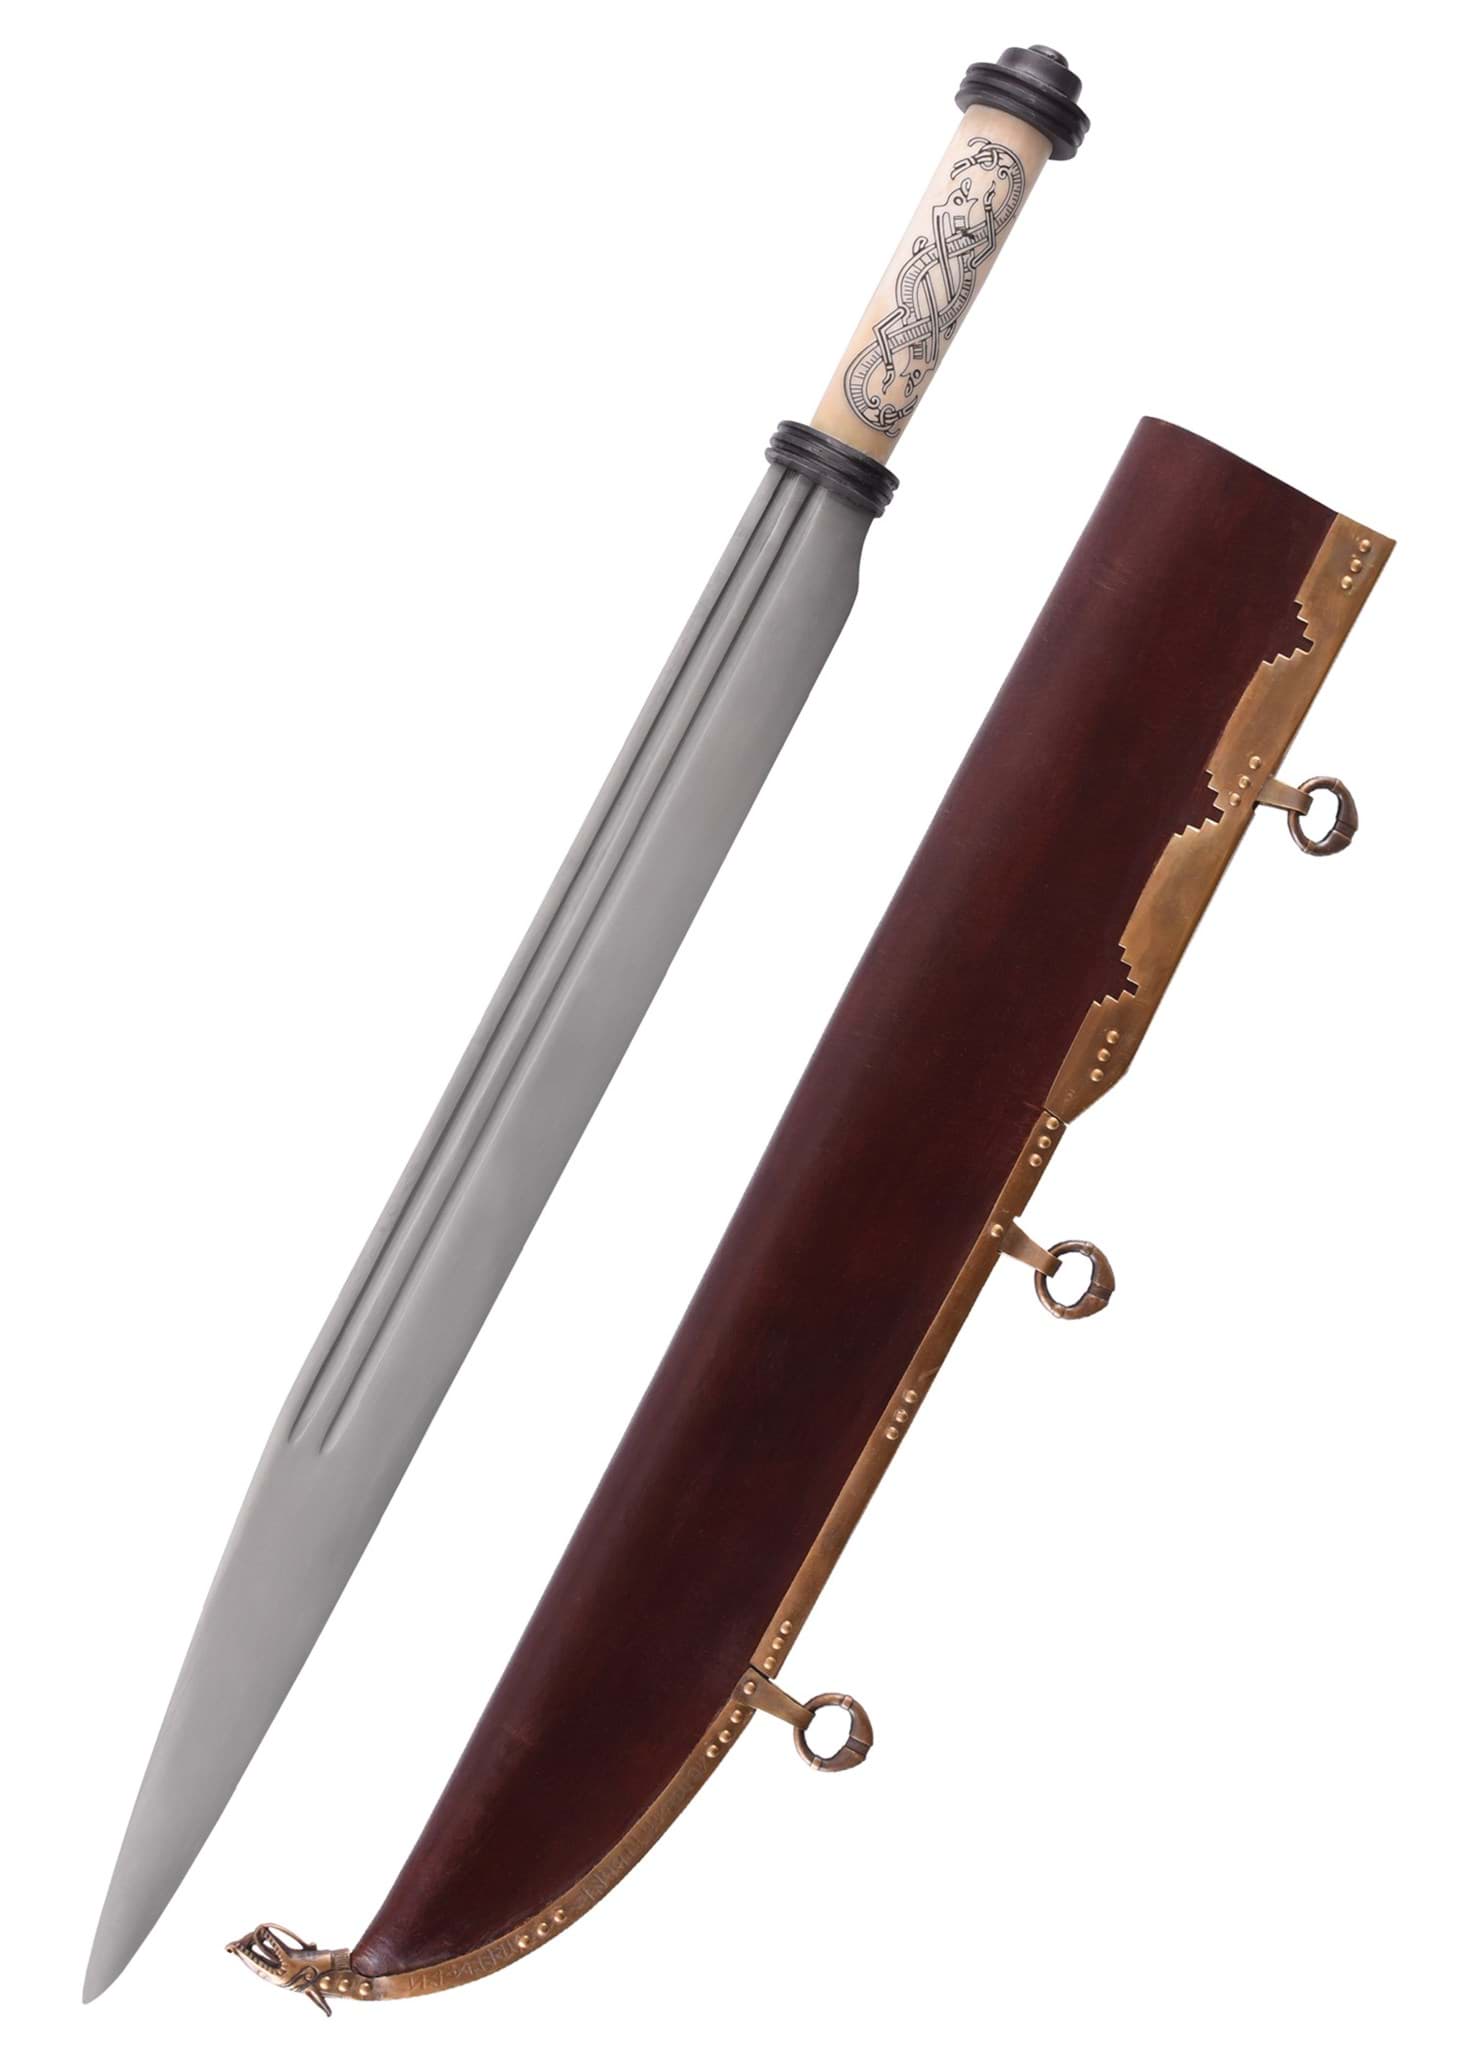 Picture of Battle Merchant - Viking Long Seax with Bone Handle in Jelling Style 10th Century